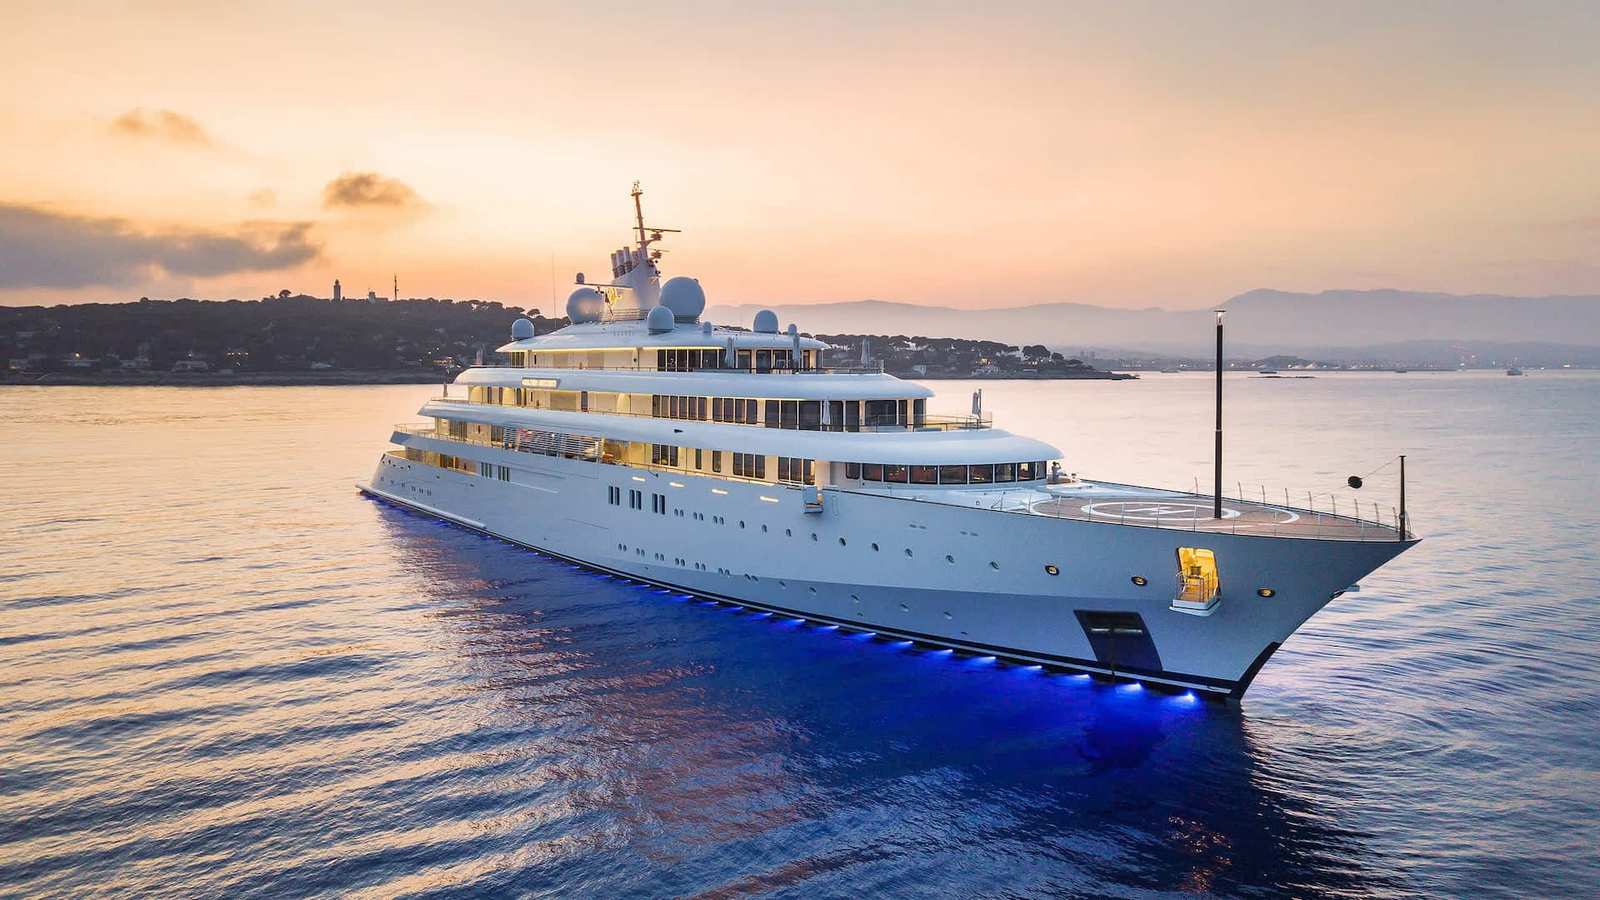 failing-to-repay-his-loan-a-saudi-prince-s-usd400-million-superyacht-has-been-seized-and-auctioned-in-malta-for-just-usd150-million-the-floating-palace-is-the-world-s-36th-largest-yacht-and-its-sale-proceeds-will-go-to-deutsche-bank-luxurylaunches